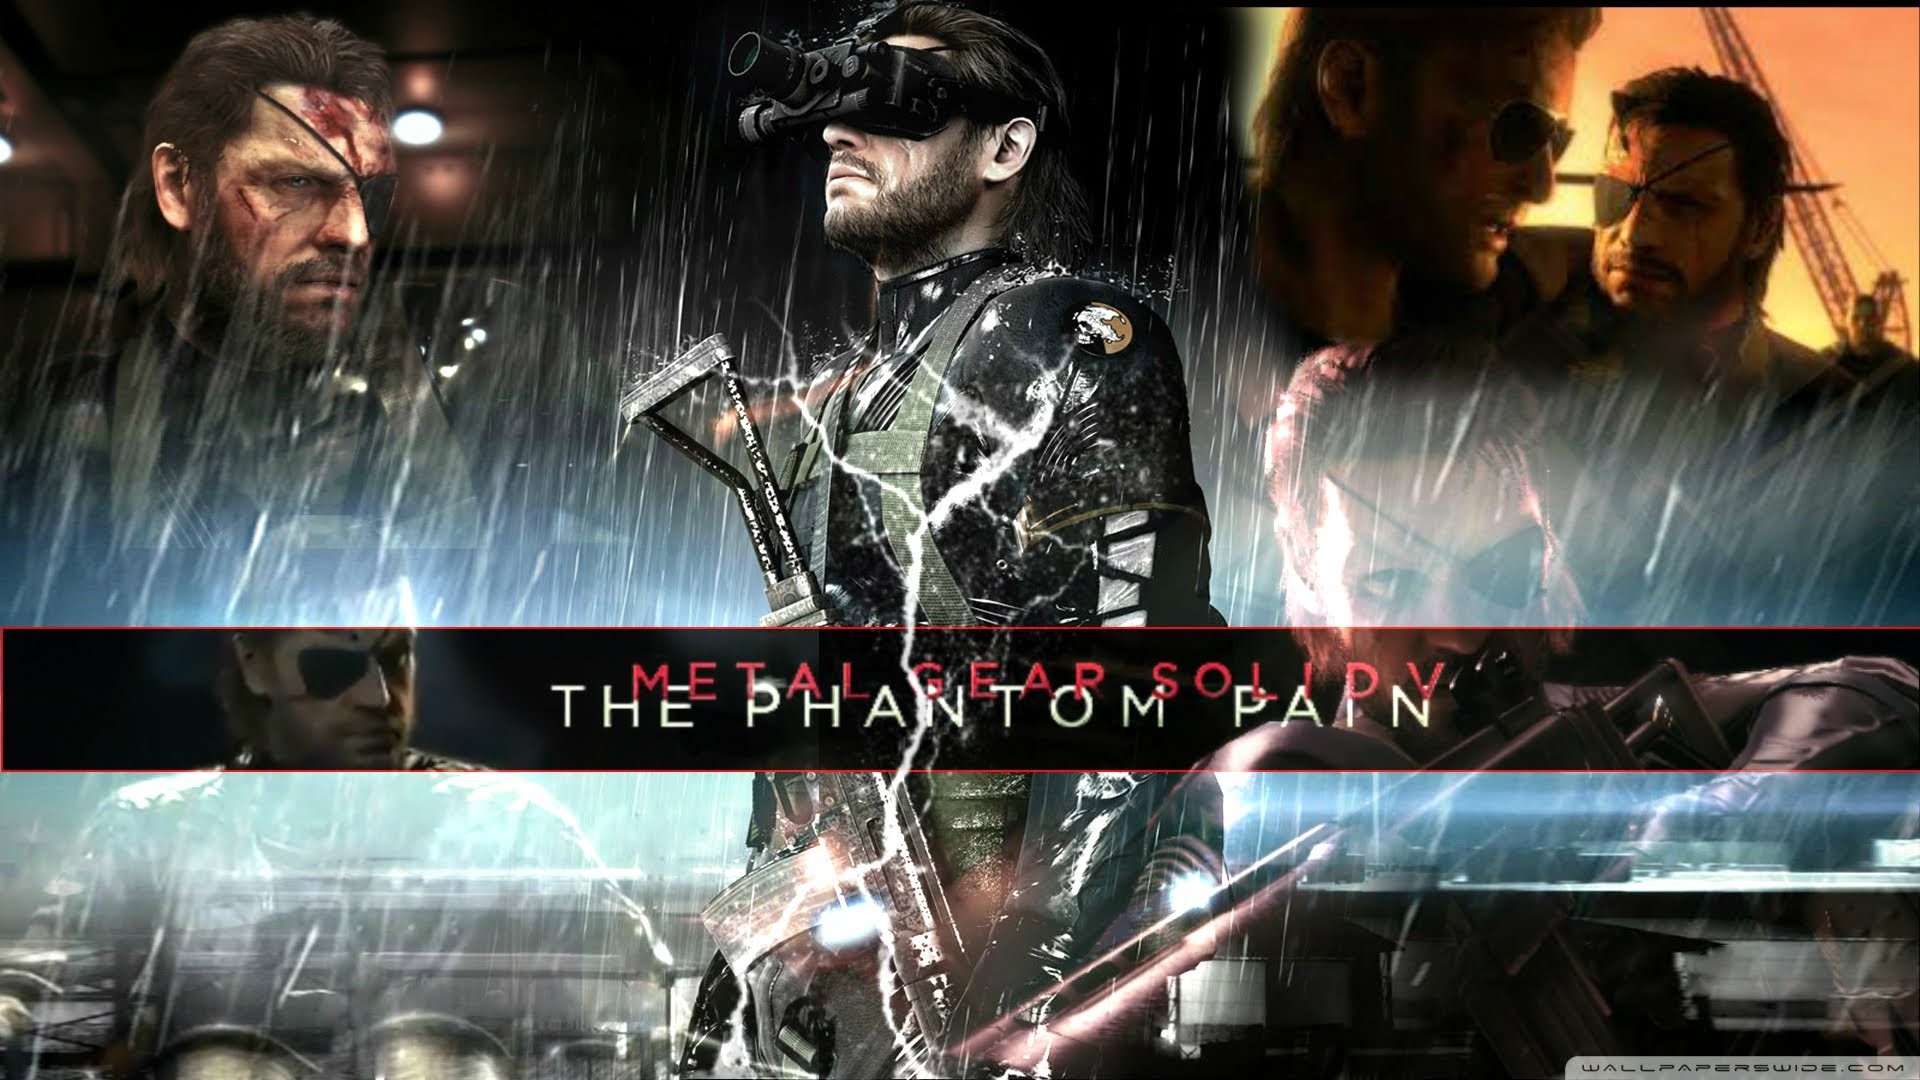 Metal Gear Solid V The Phantom Pain – Official 30 Minute Gameplay Demo E3 2014 HD 1080p – YouTube